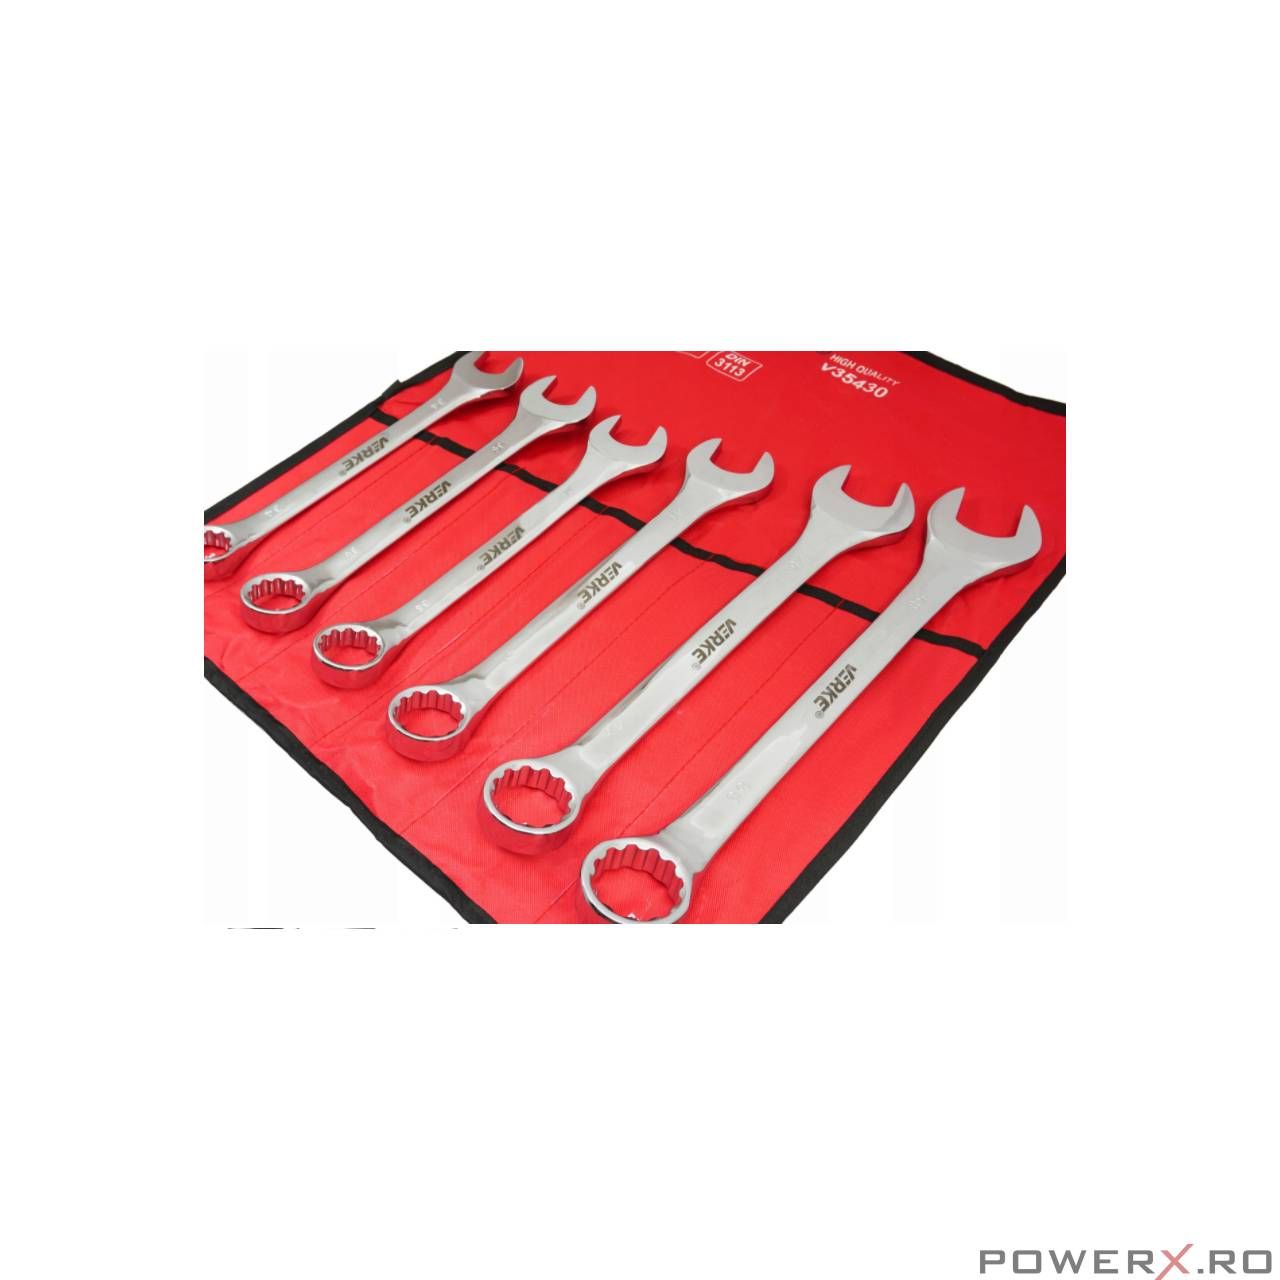 Set chei combinate inelare si fixe 34, 36, 38, 41, 46, 50 mm, 6 piese